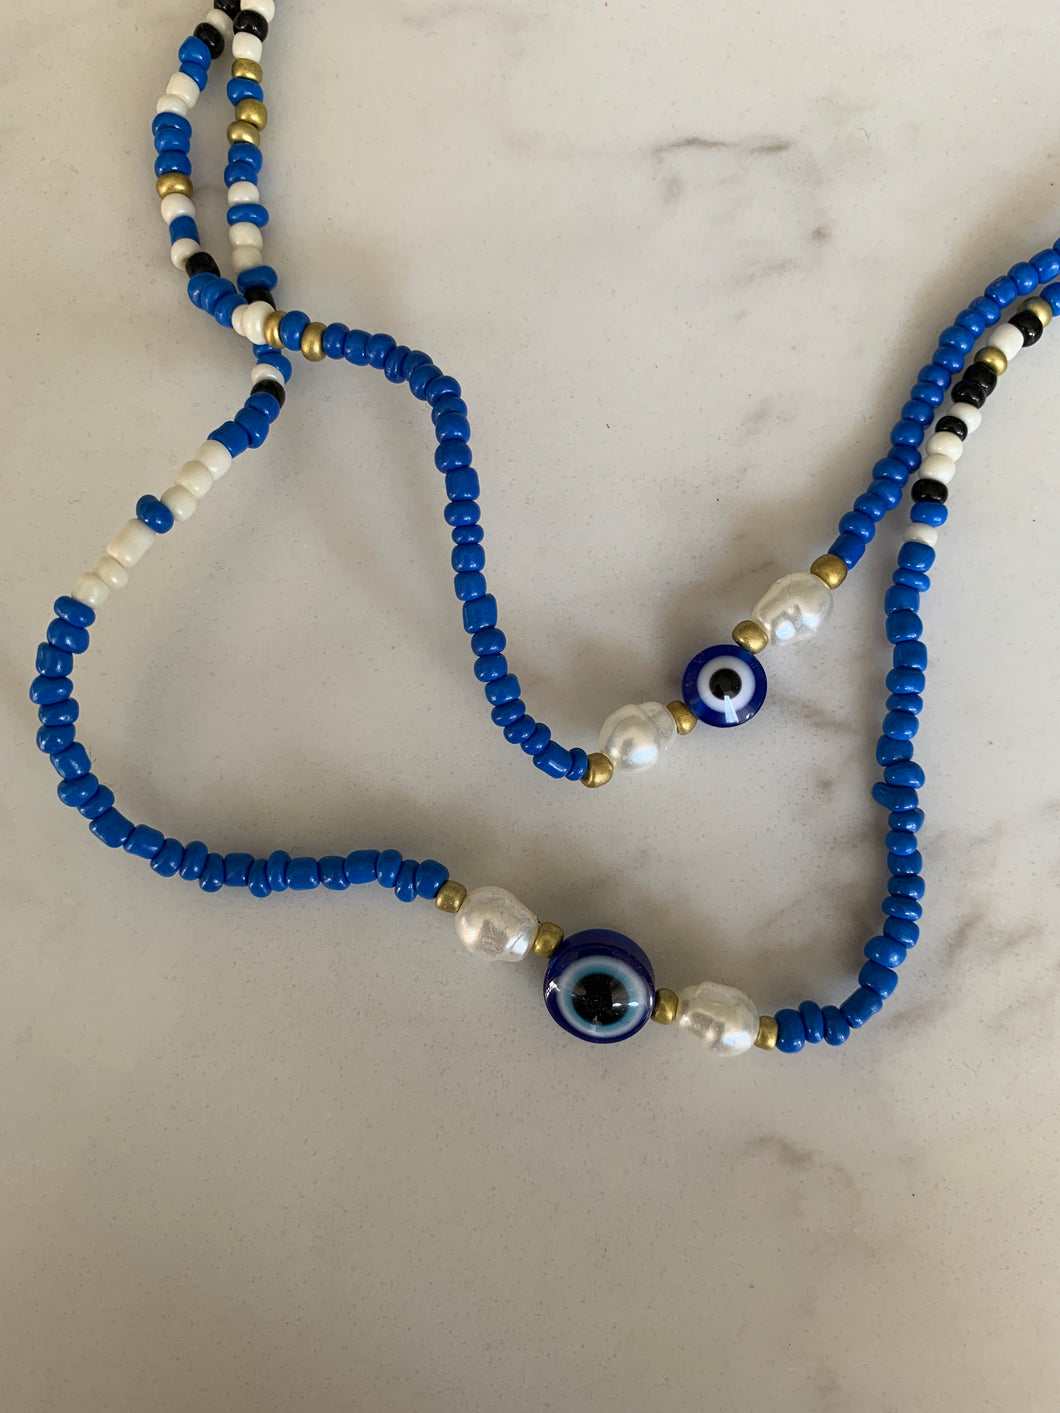 *powerful* Evil Eye Intention Chain Necklace for Manifesting Your Wishes & Getting Rid of Negativity Dainty Delicate Intention Jewellery Clasp Closure